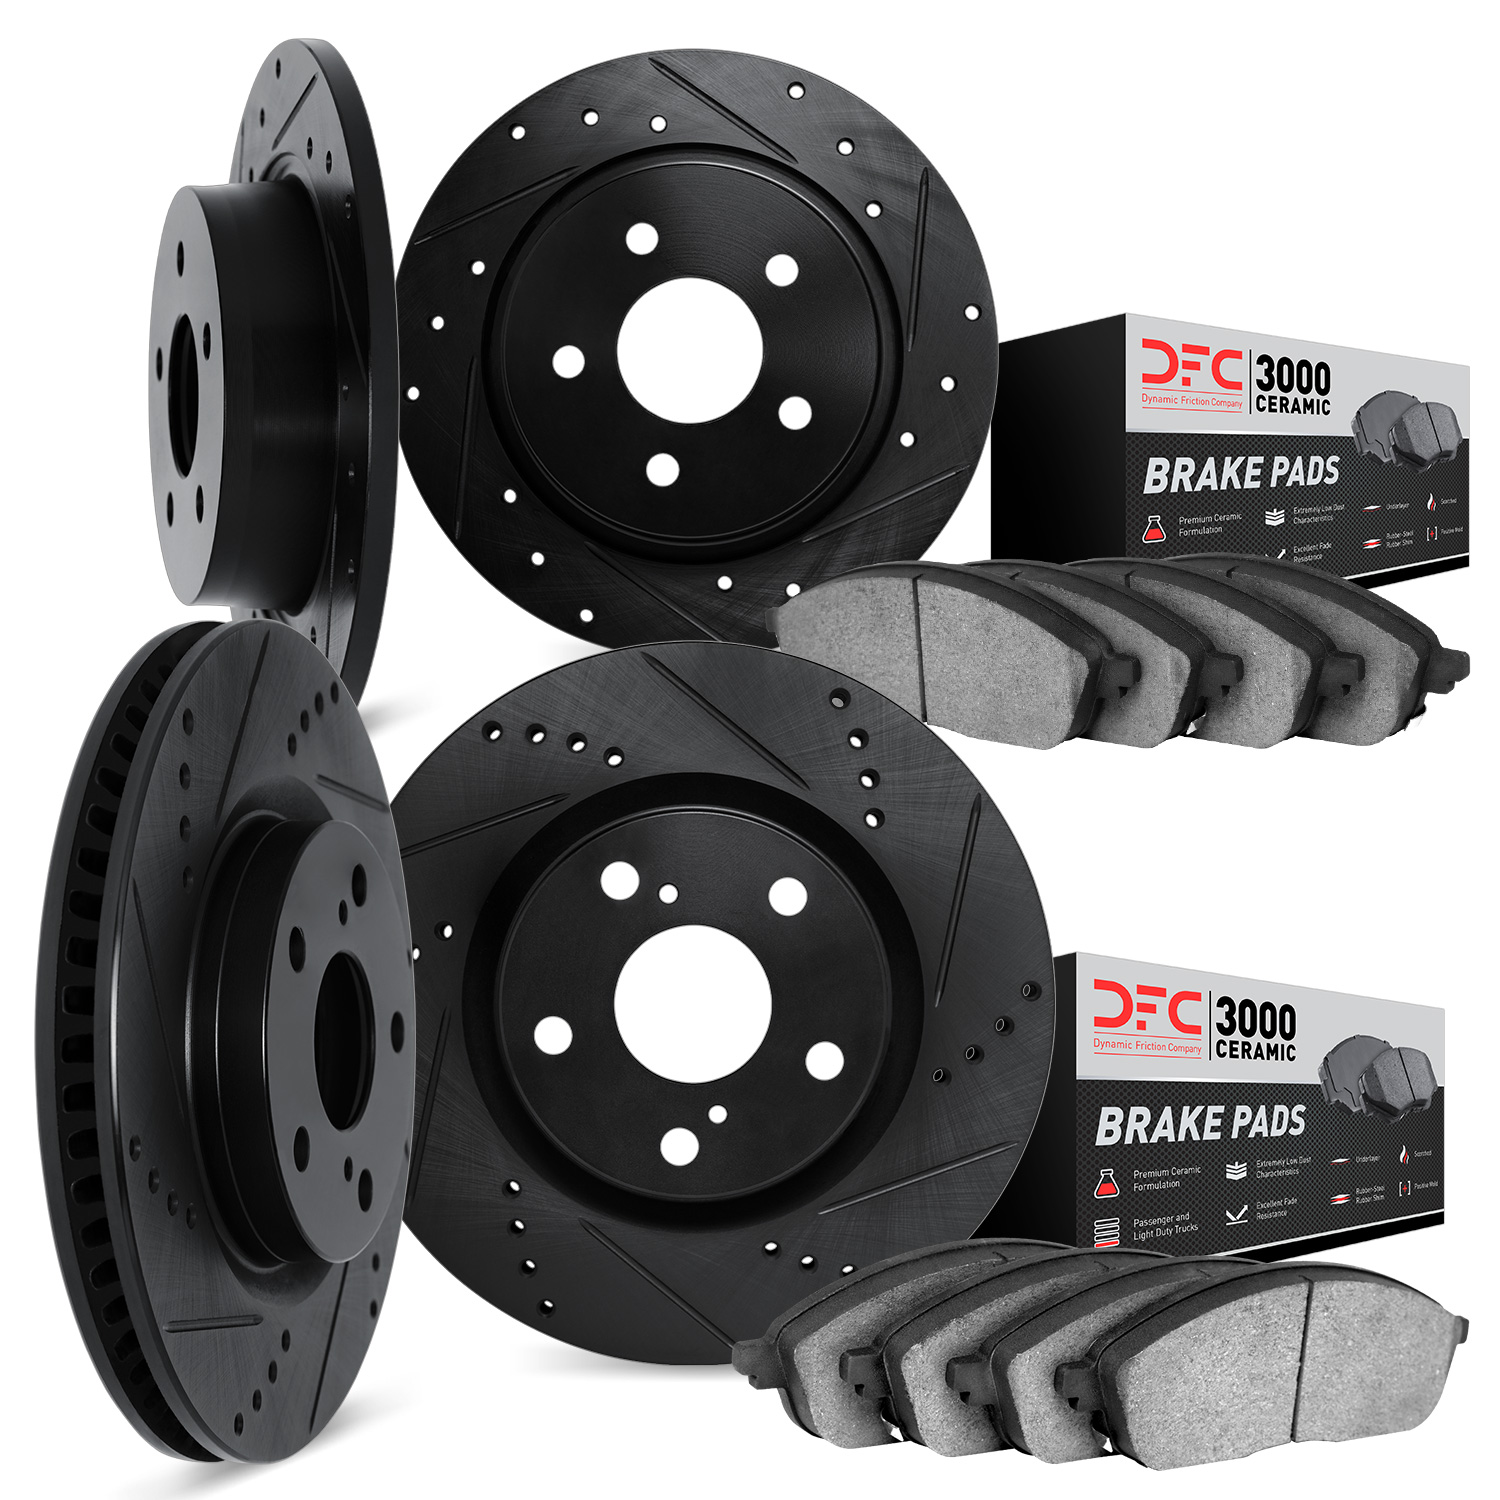 8304-67074 Drilled/Slotted Brake Rotors with 3000-Series Ceramic Brake Pads Kit [Black], Fits Select Infiniti/Nissan, Position: